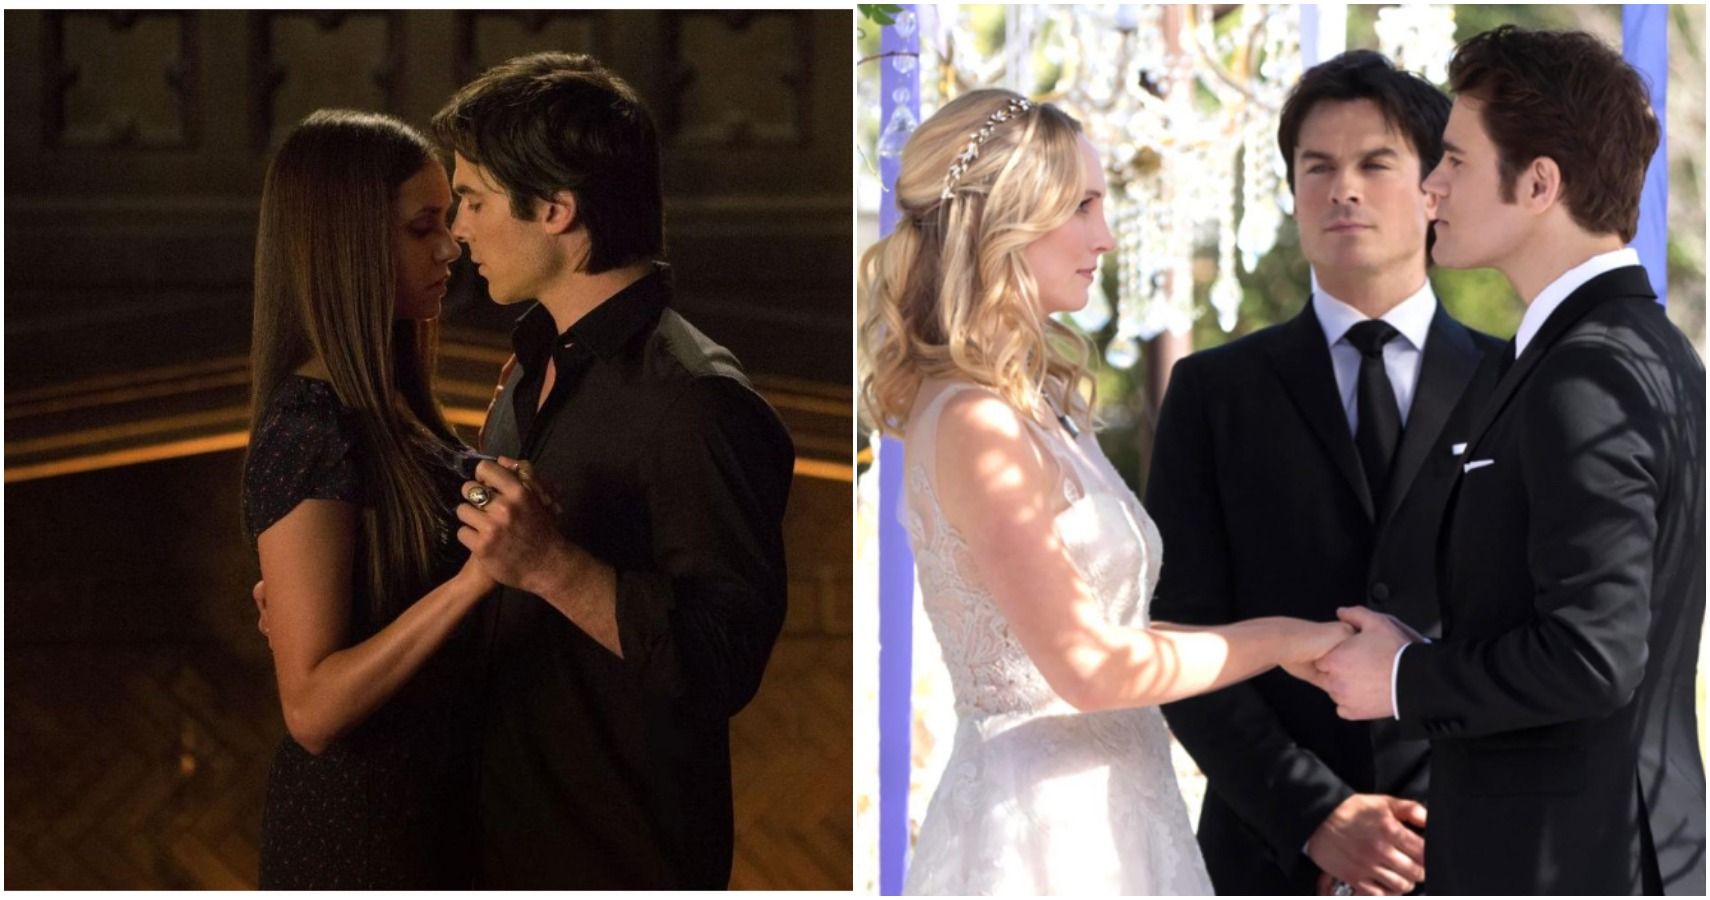 Split image of couples Elena and Damon as well as Caroline and Stefan in The Vampire Diaries